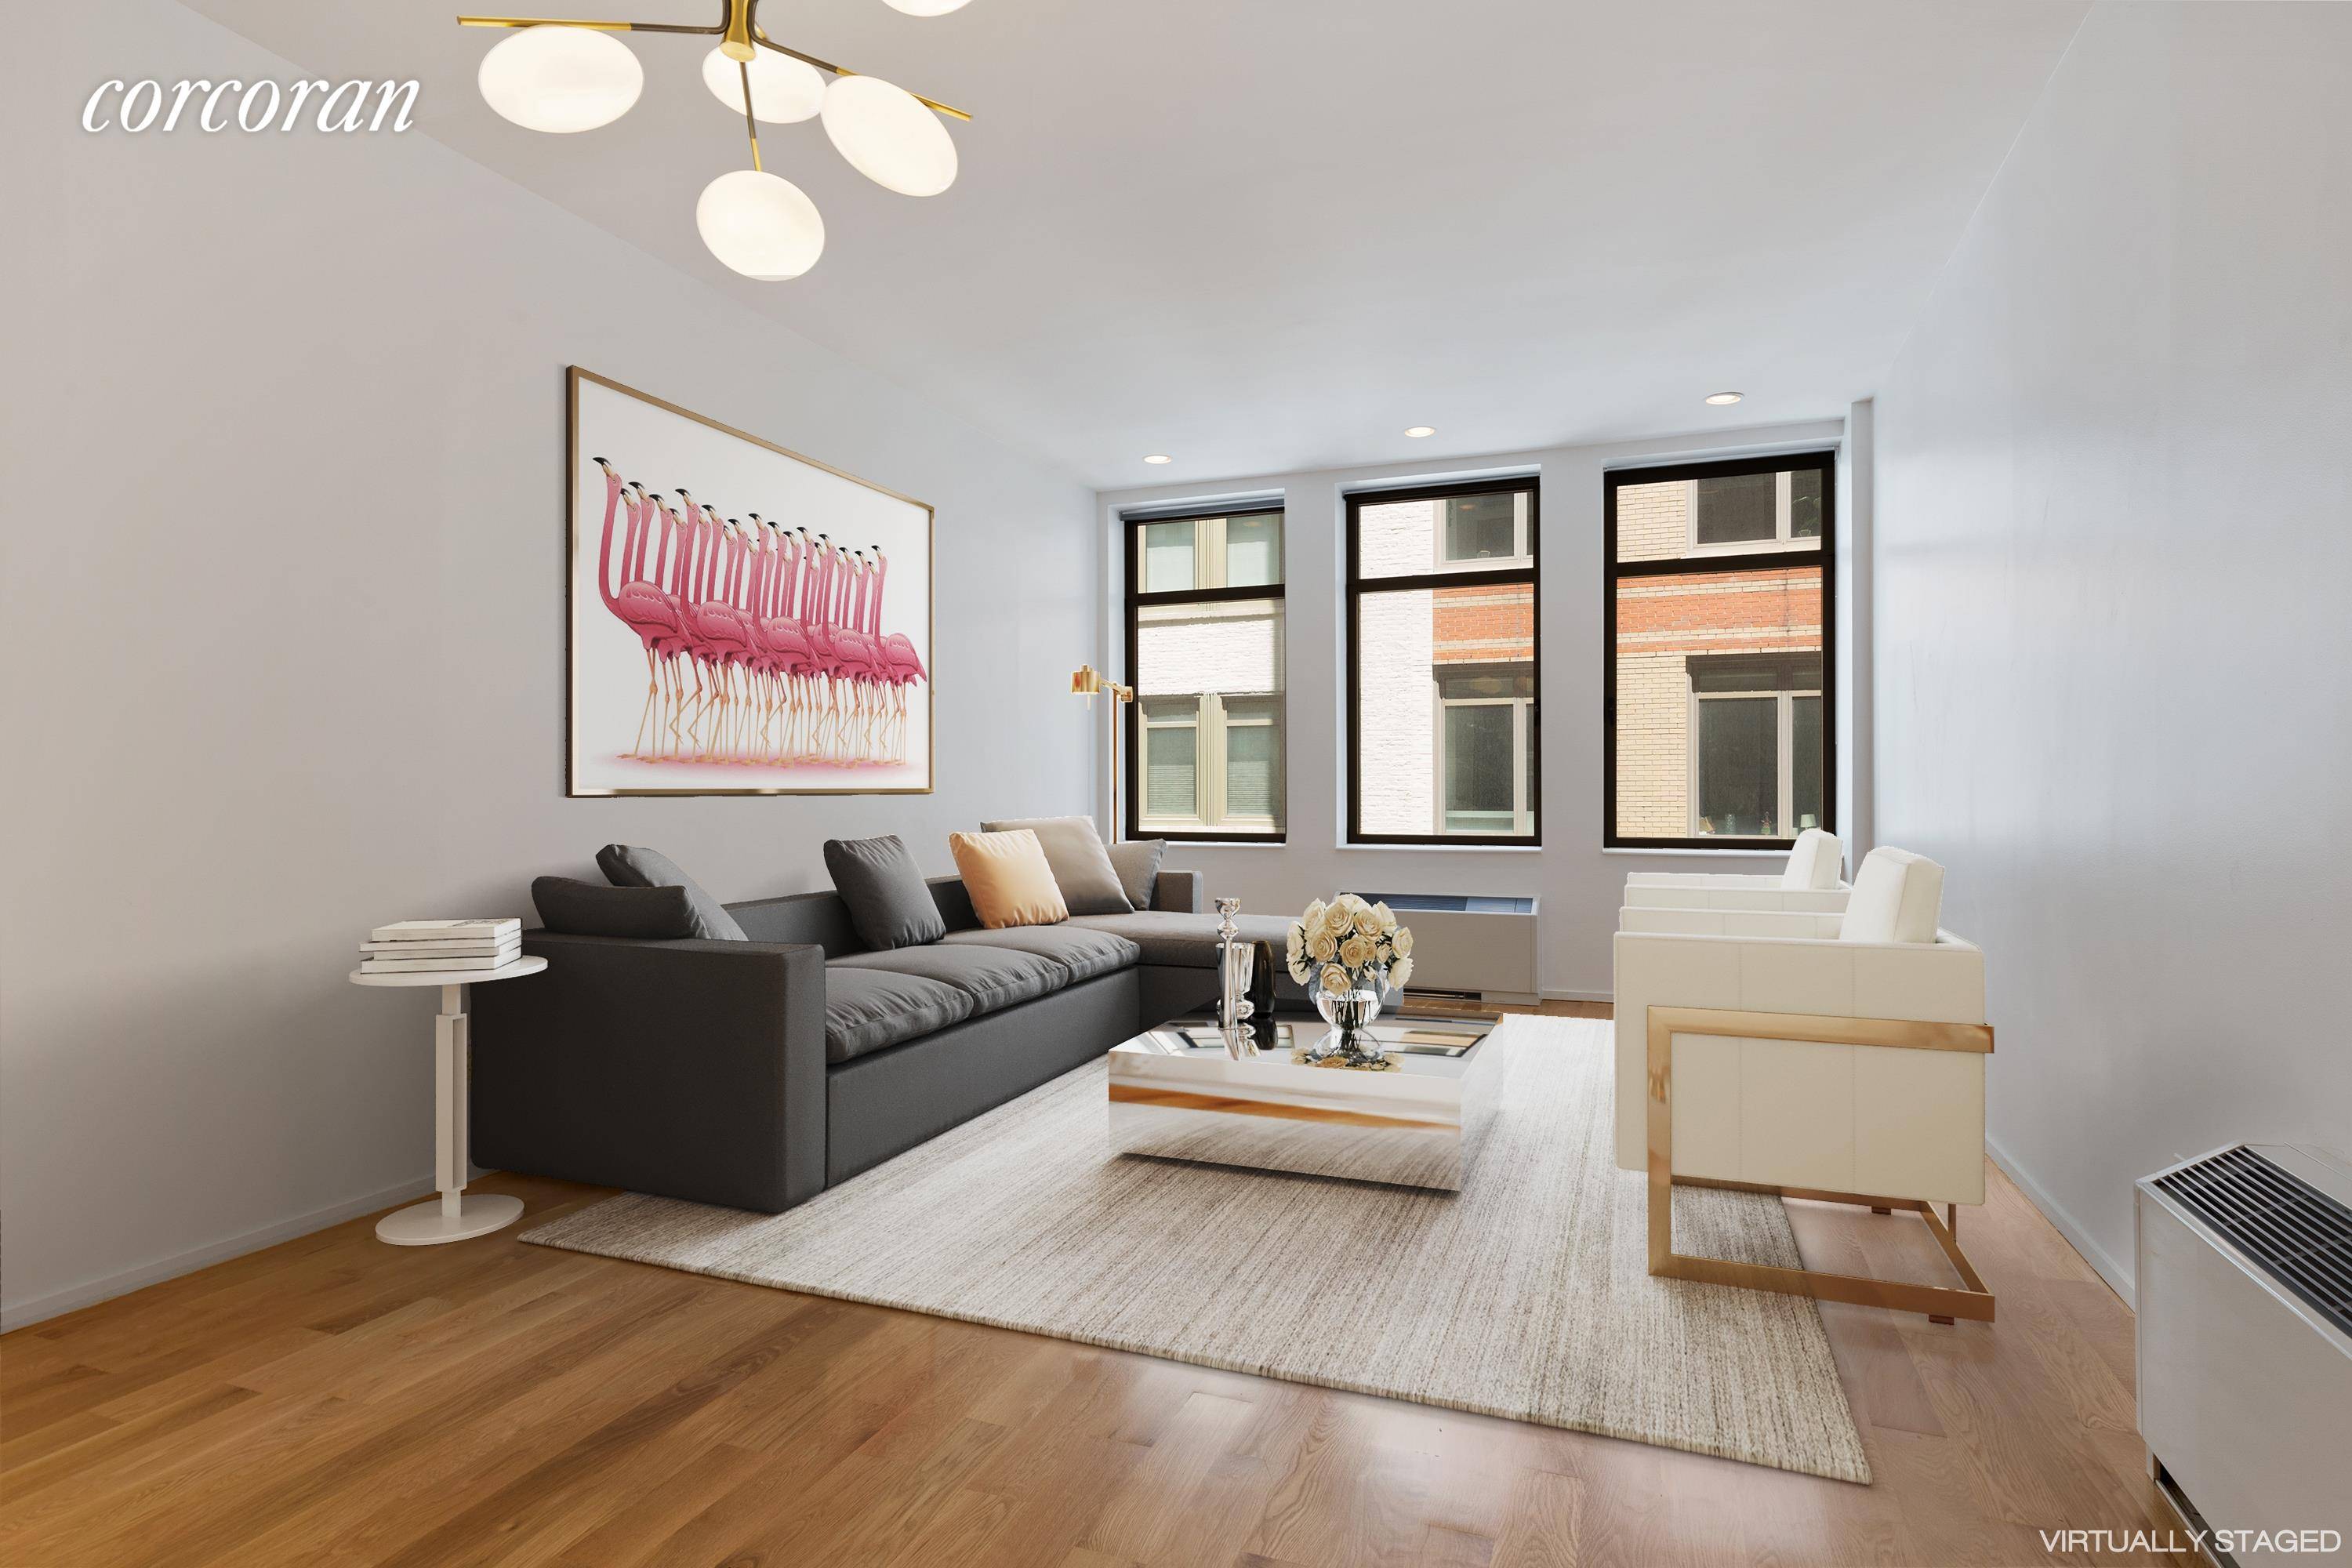 Spectacular renovations have been completed in this ultra luxurious huge loft like one bedroom home at The Chelsea Mercantile, 252 Seventh Ave 8S.